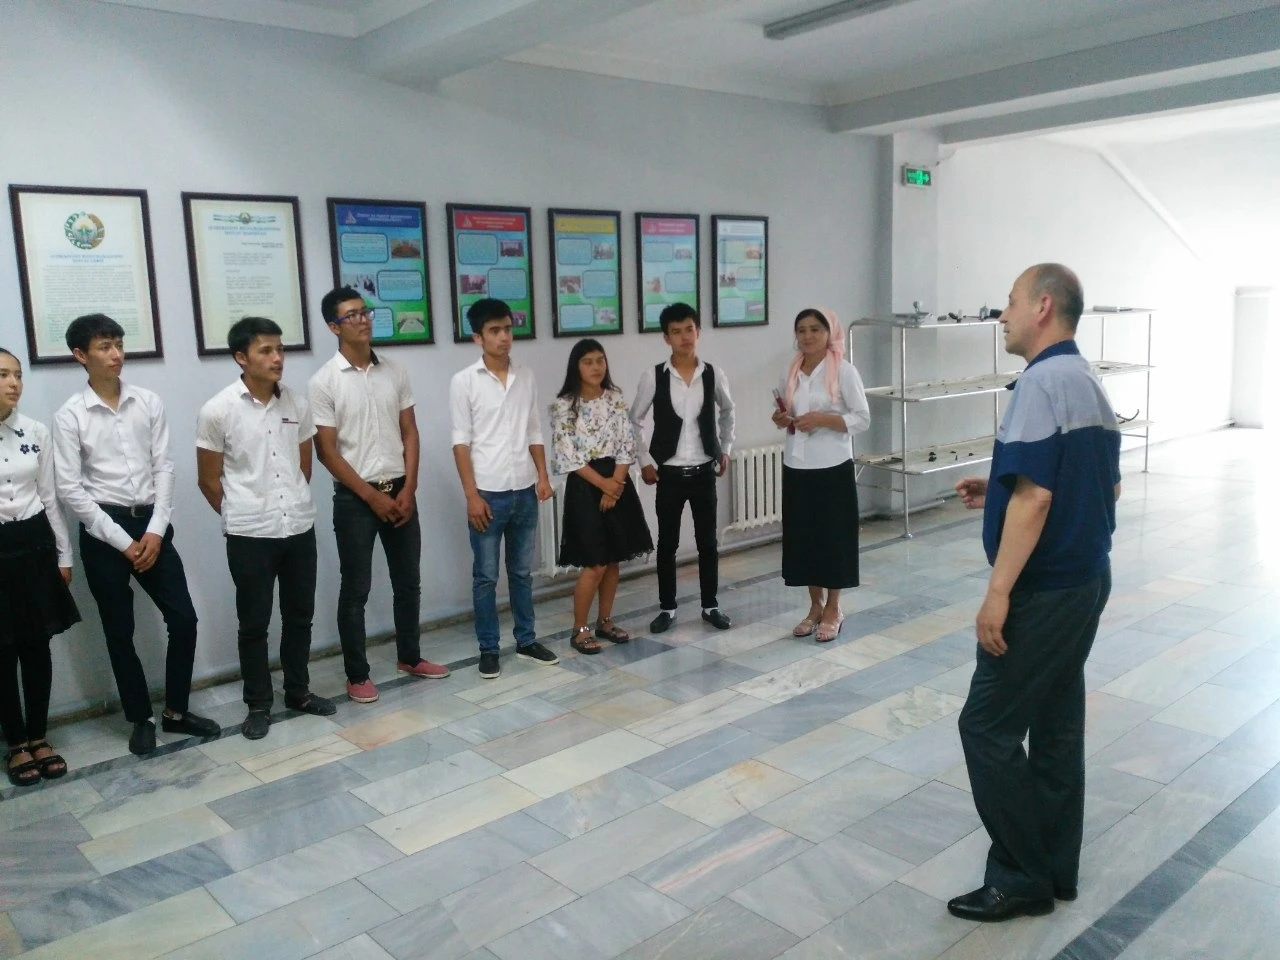 ON MAY 21, IN ORDER TO FURTHER CHOOSE A PROFESSION AND INCREASE THE INTEREST OF GRADUATING STUDENTS, A VISIT TO THE O'ZERAE CLIMATE CONTROL ENTERPRISE WAS ORGANIZED